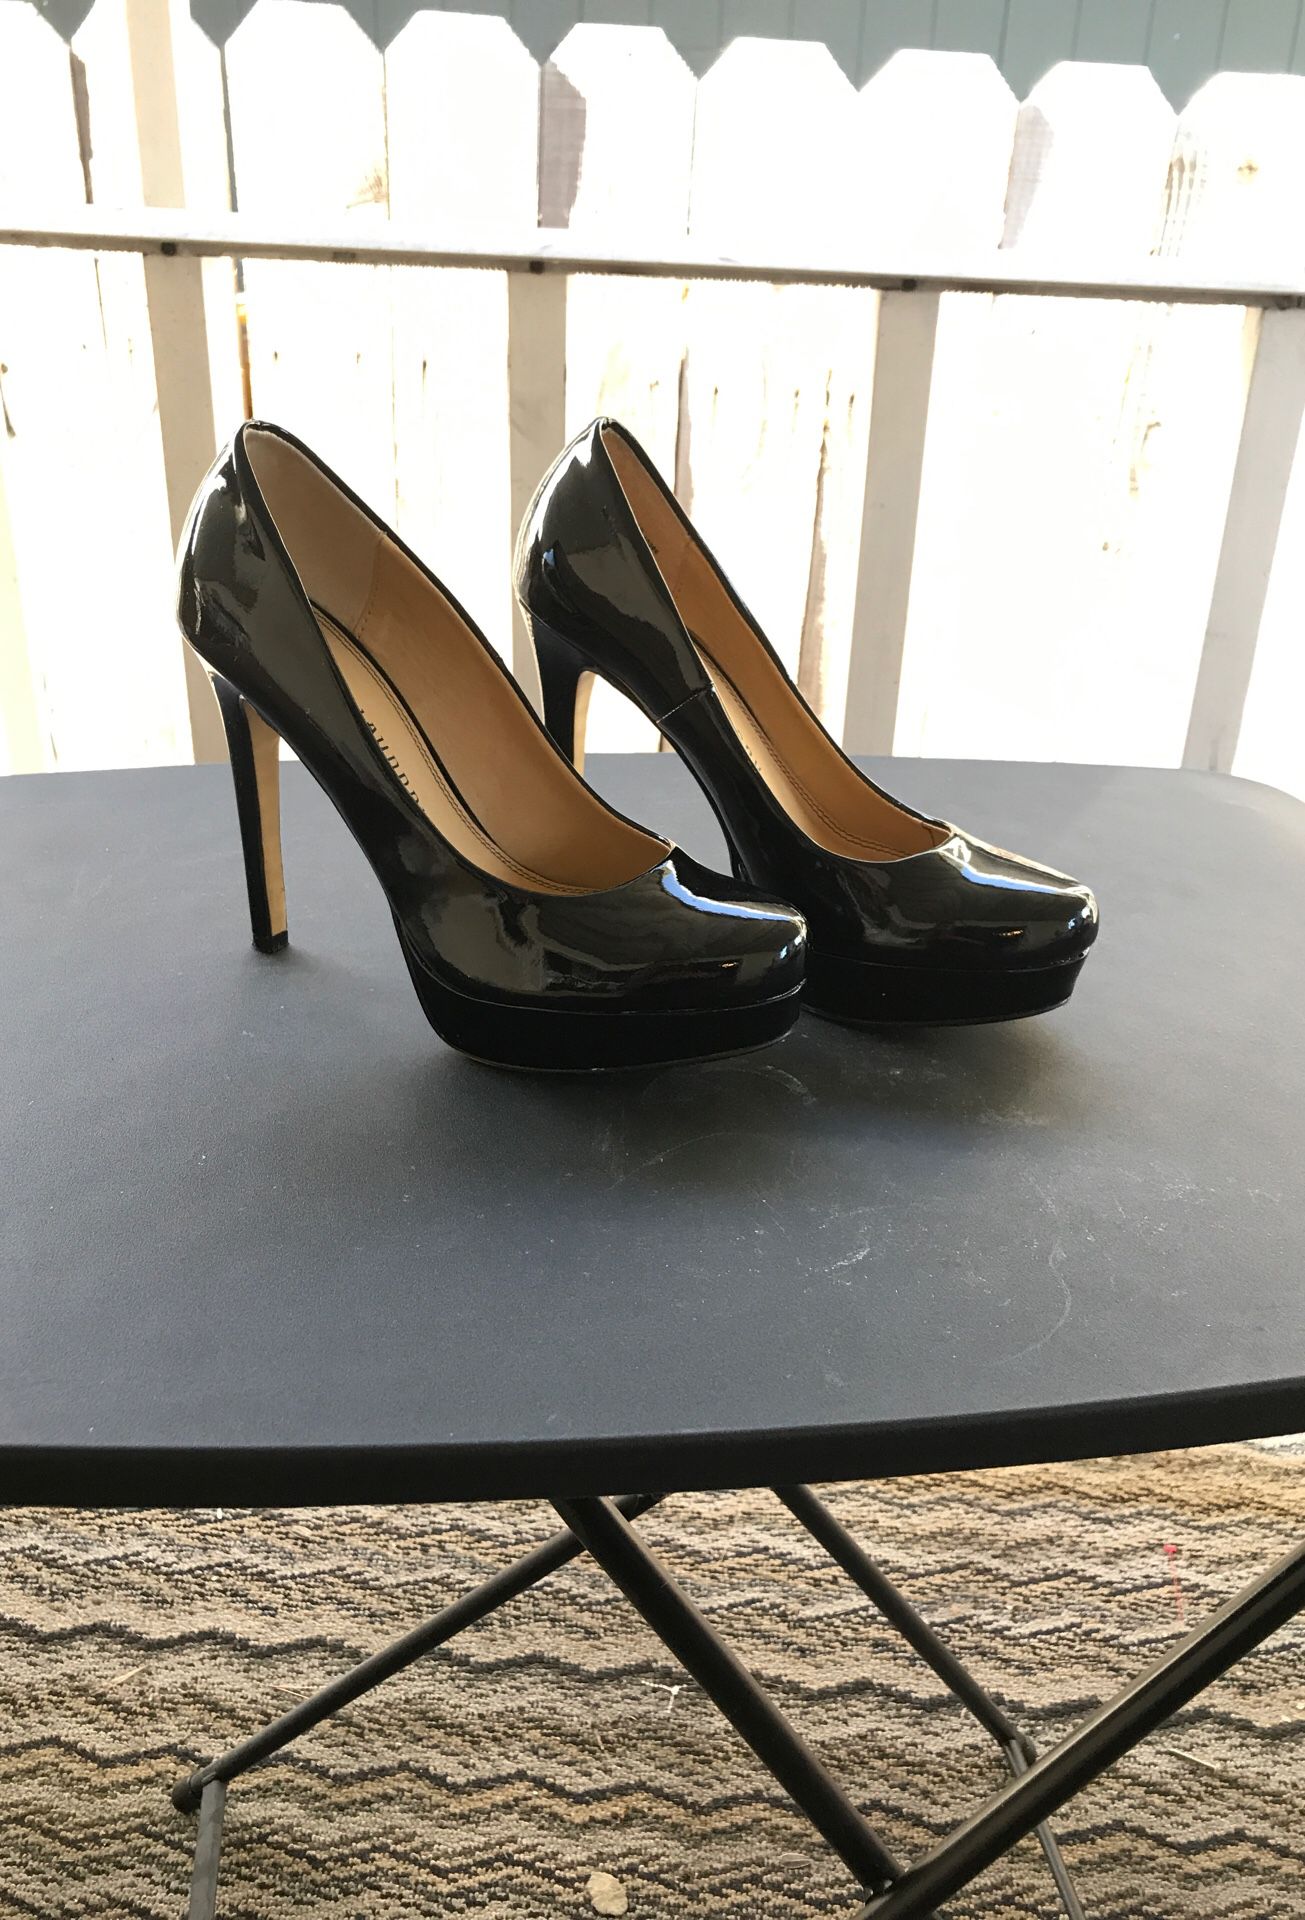 🔥🔥moving sale! Stunning black high heels for women size 8.1/2 M